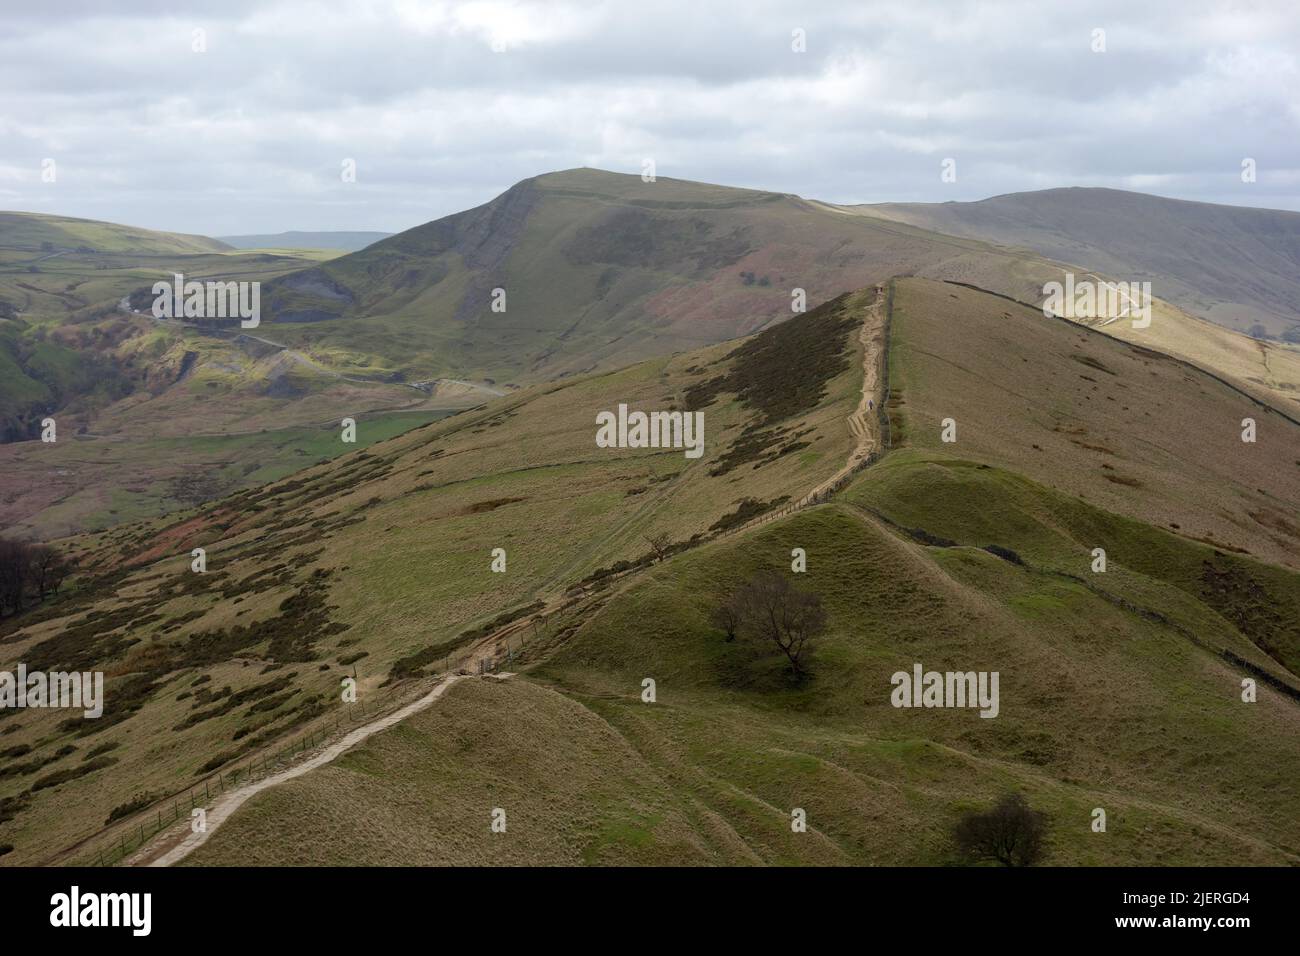 The Ridge Path over Hollins Cross Leading to Distant 'Mam Tor' from the Top of 'Black Tor' in Edale, Derbyshire, Peak District National Park, England. Stock Photo